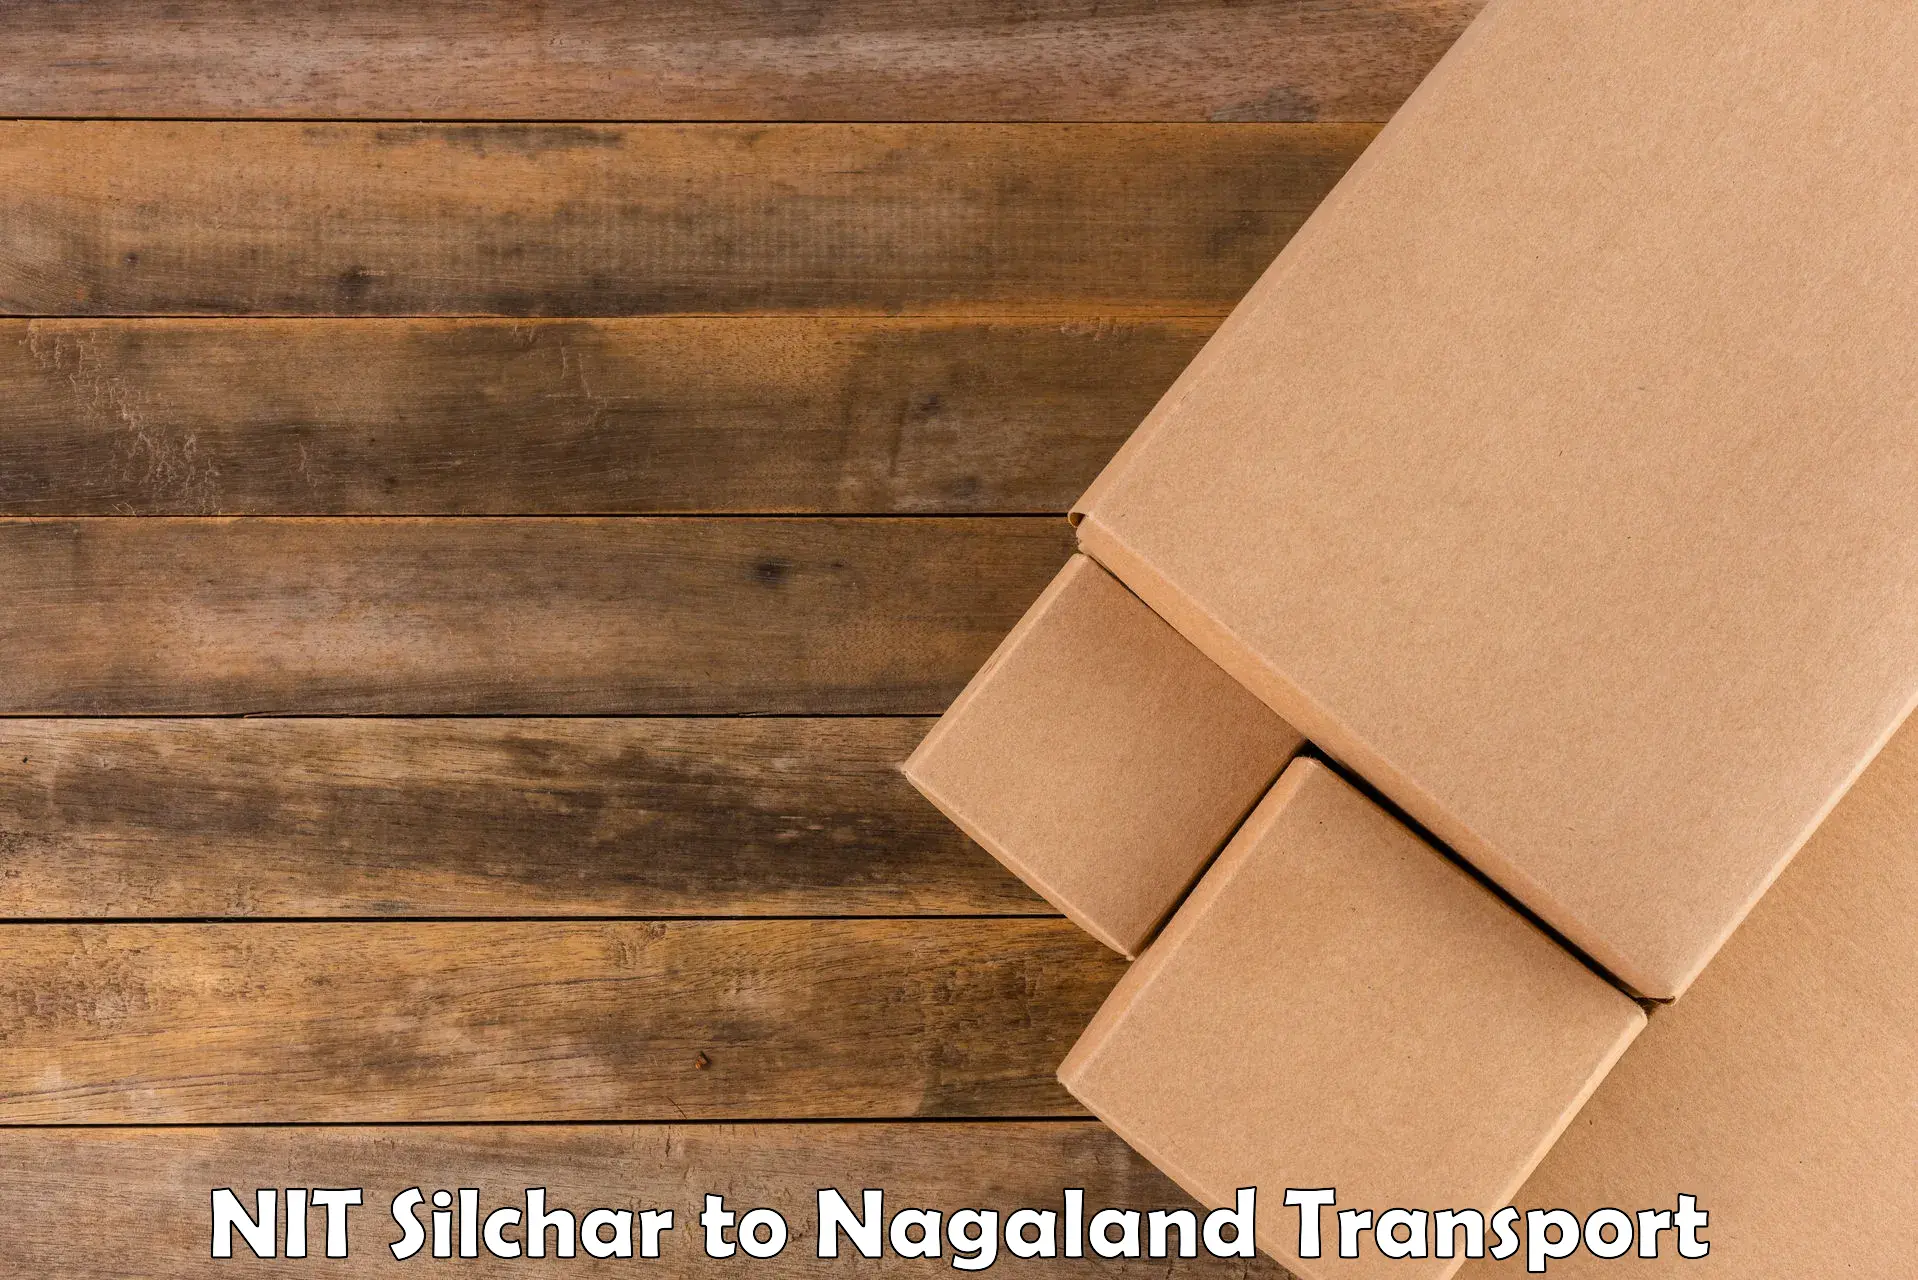 Container transport service NIT Silchar to Tuensang